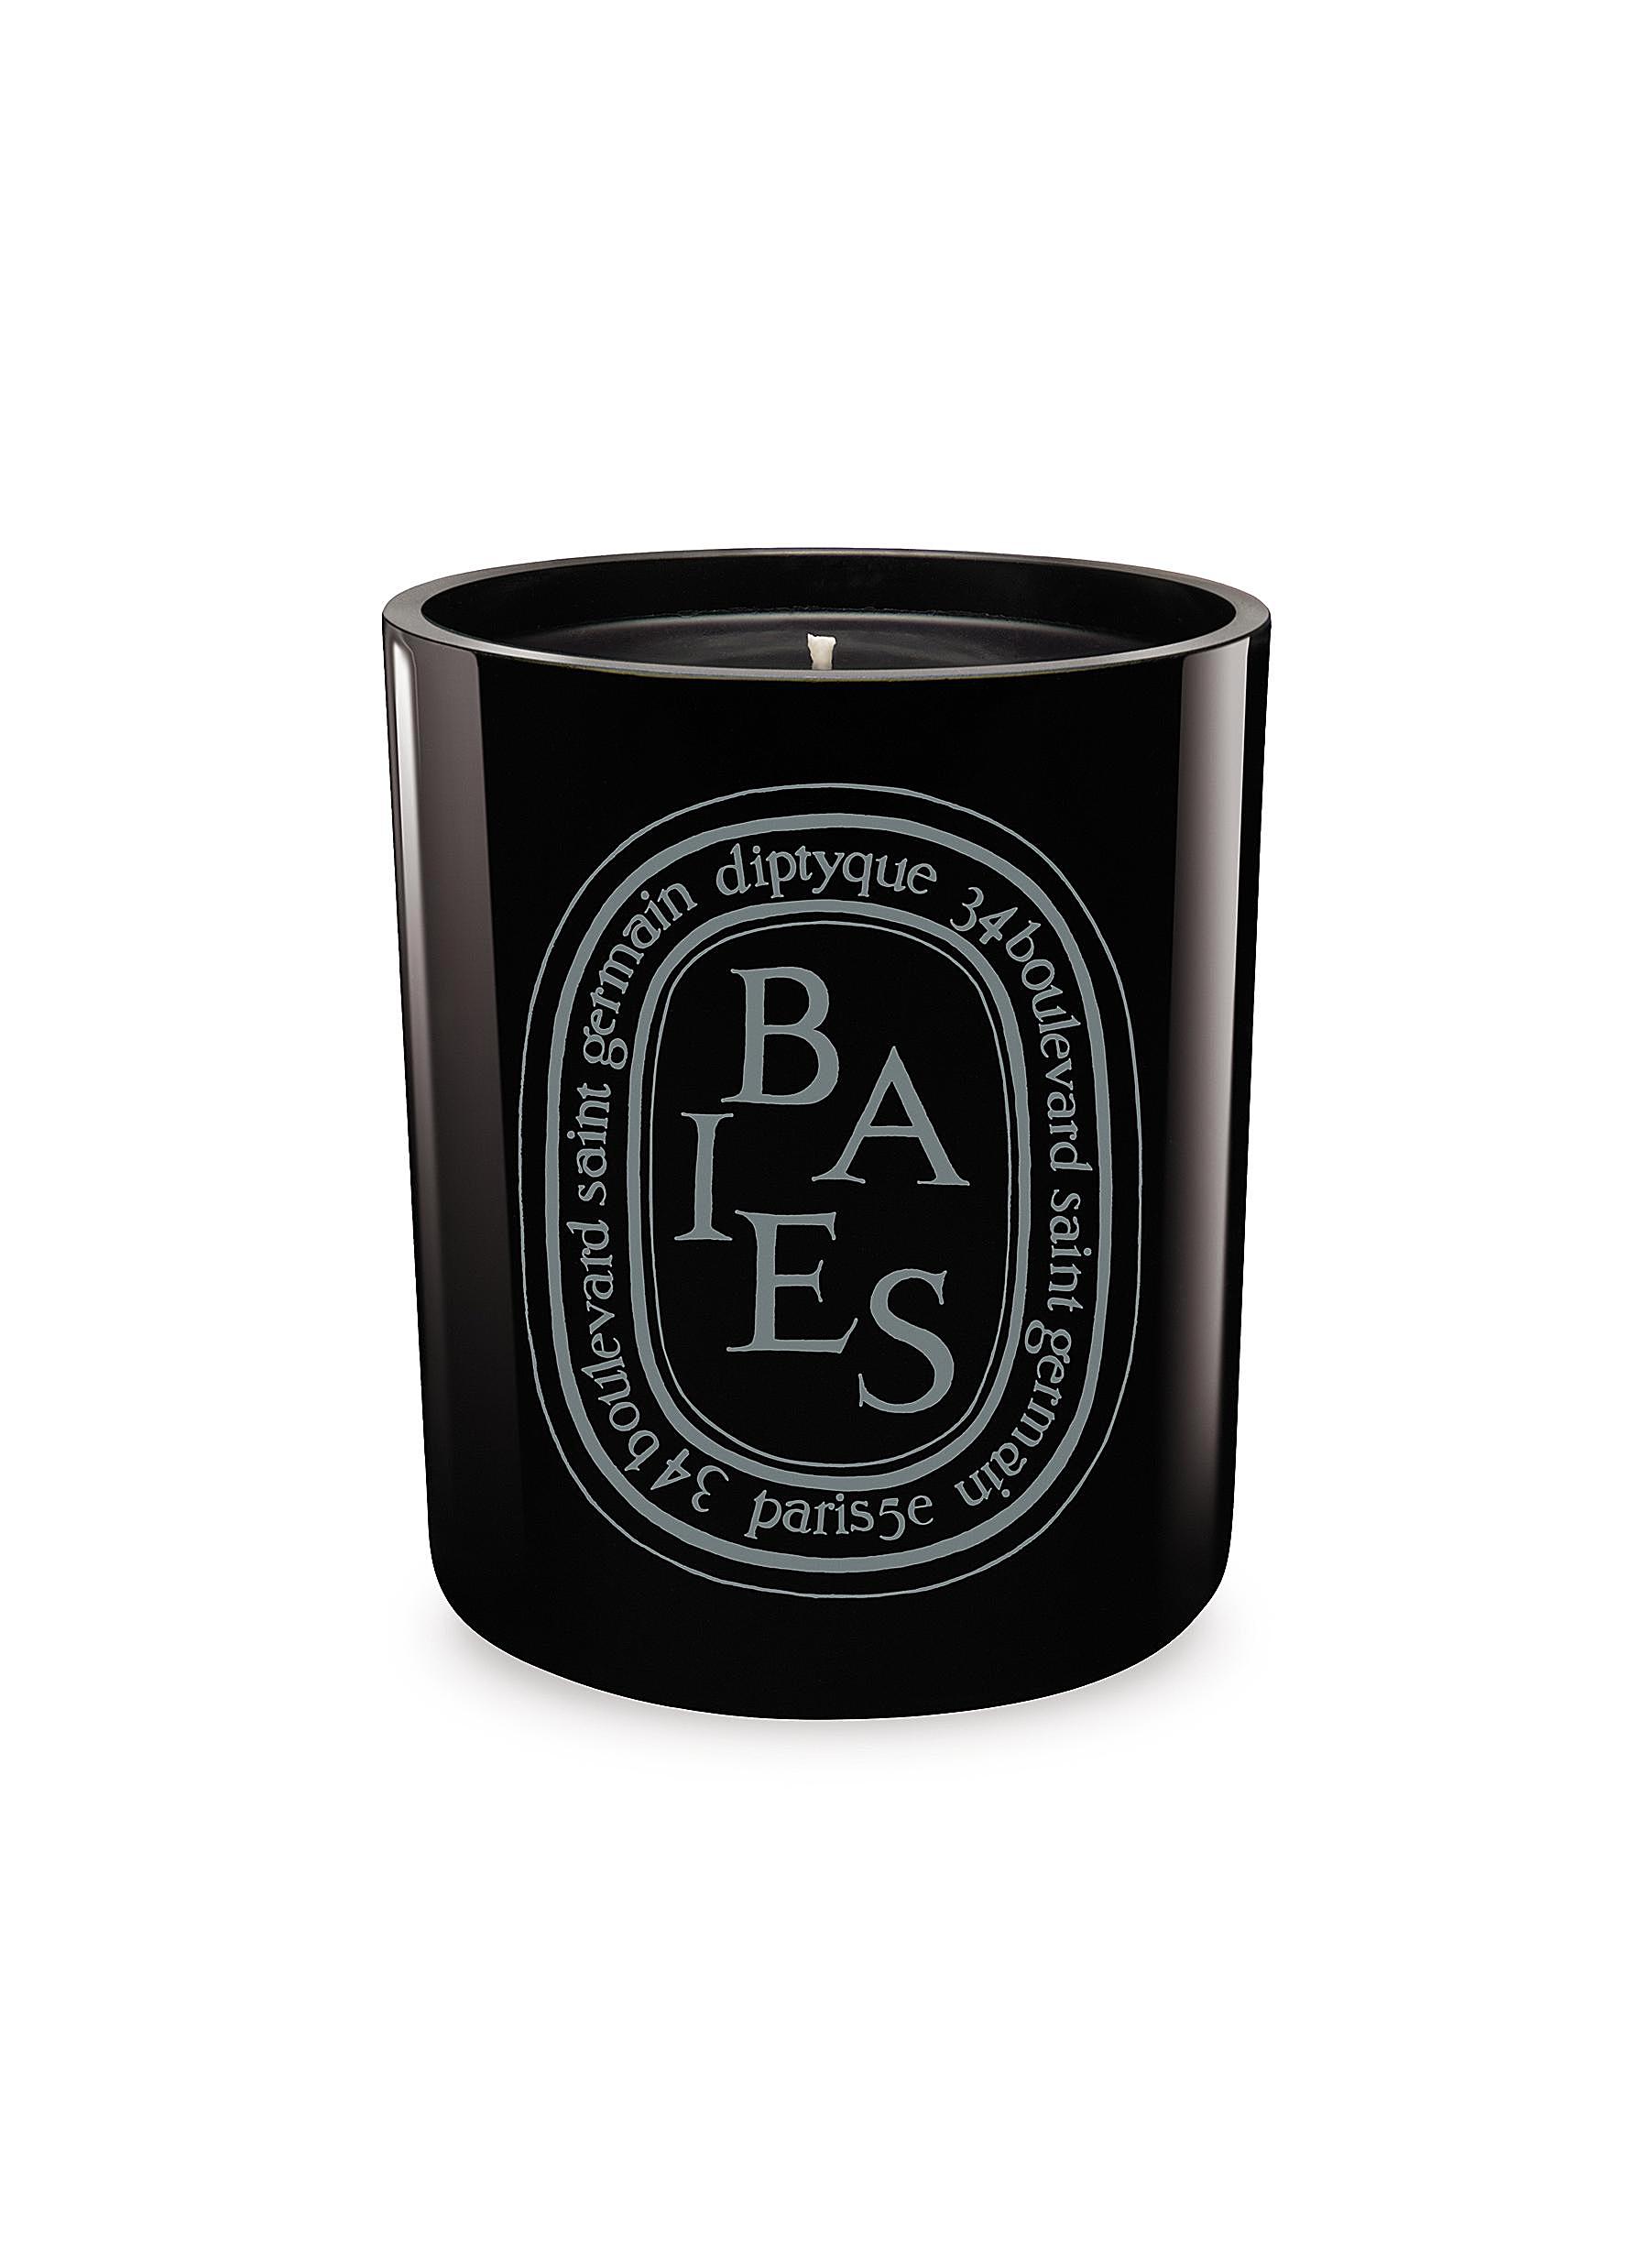 Baies Noires Scented Coloured Candle 300g